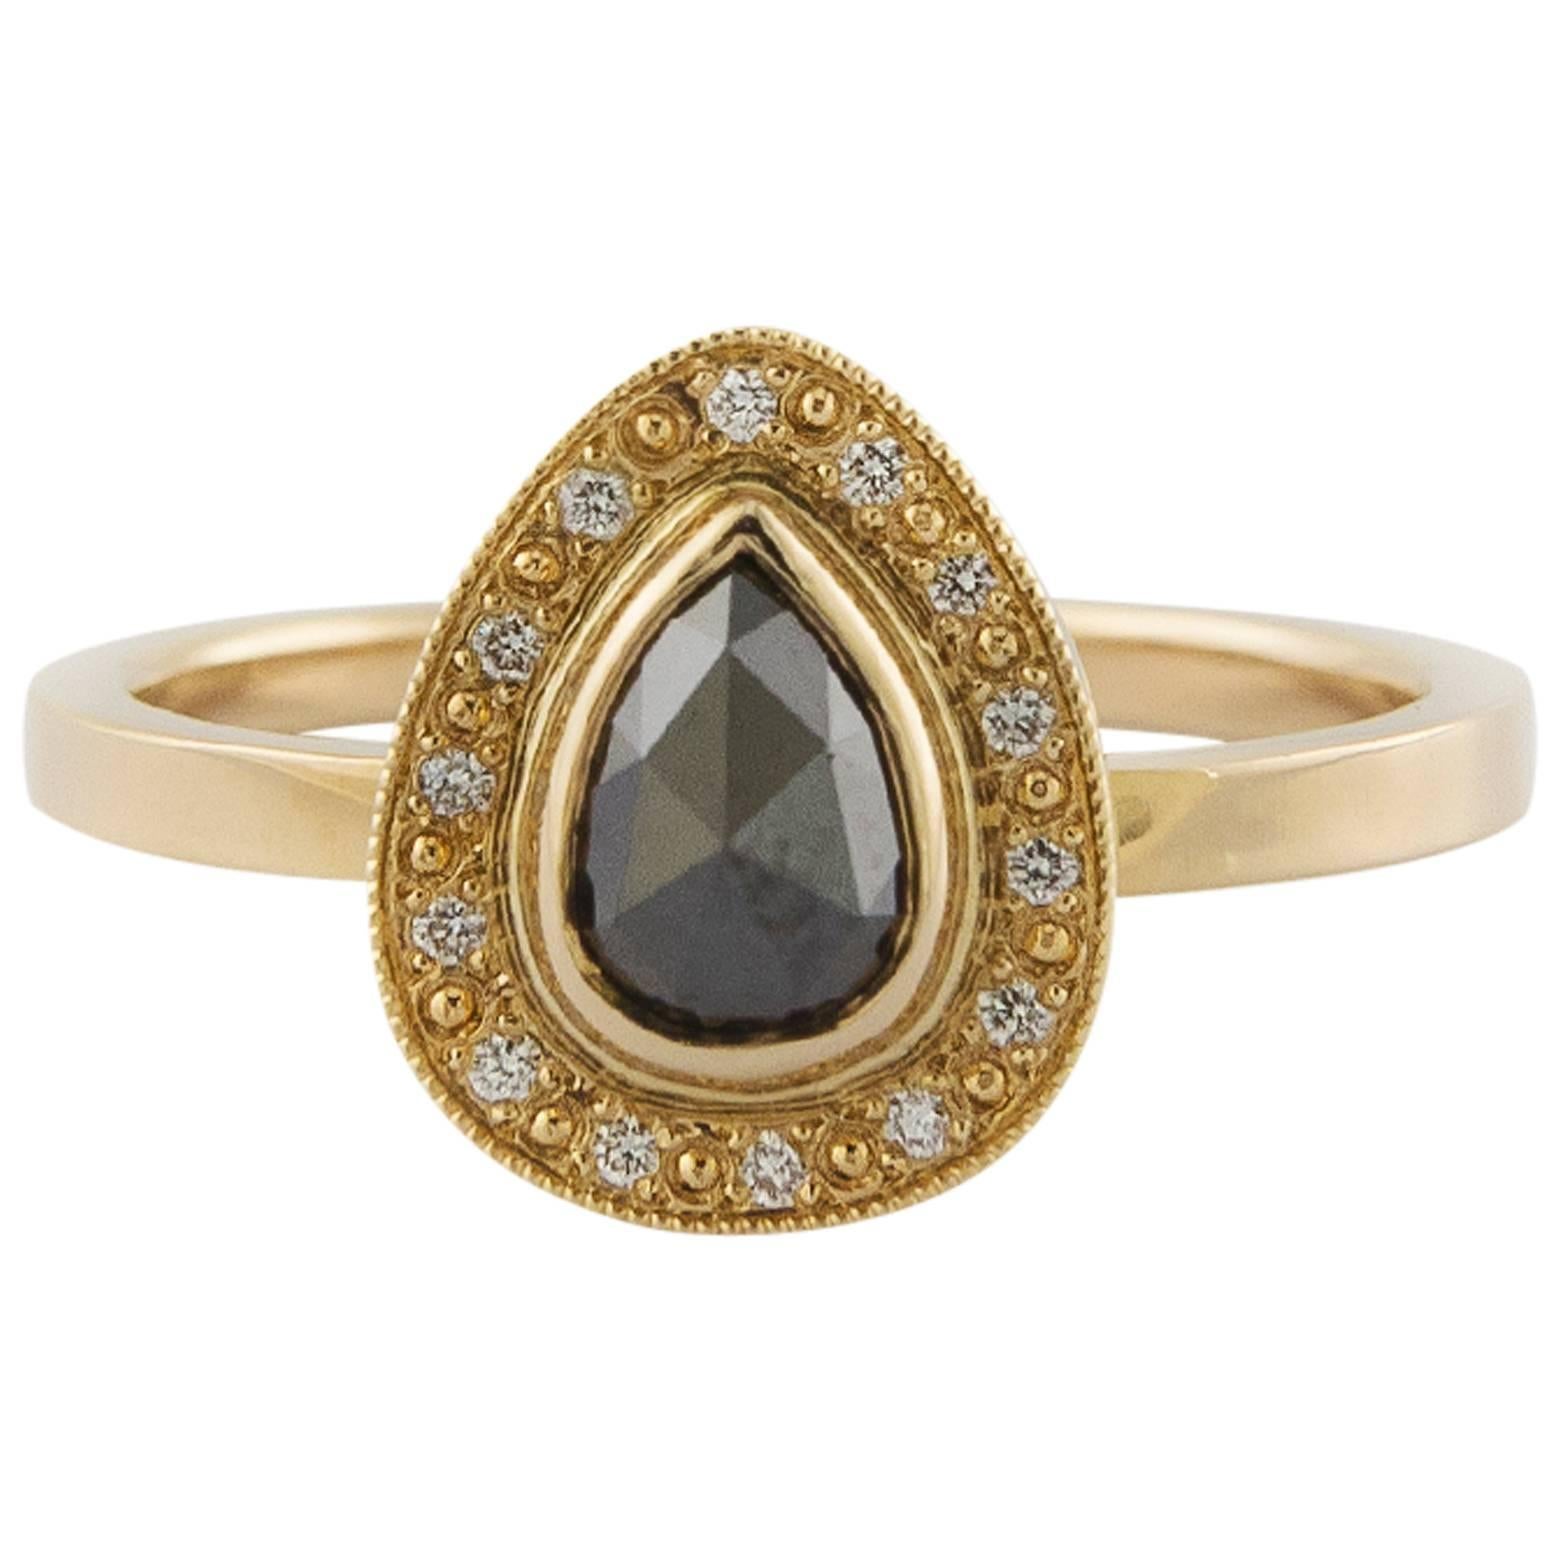 0.30 Carat Pear Shaped Brown and Rose-Cut Diamond Gold Bezel Ring